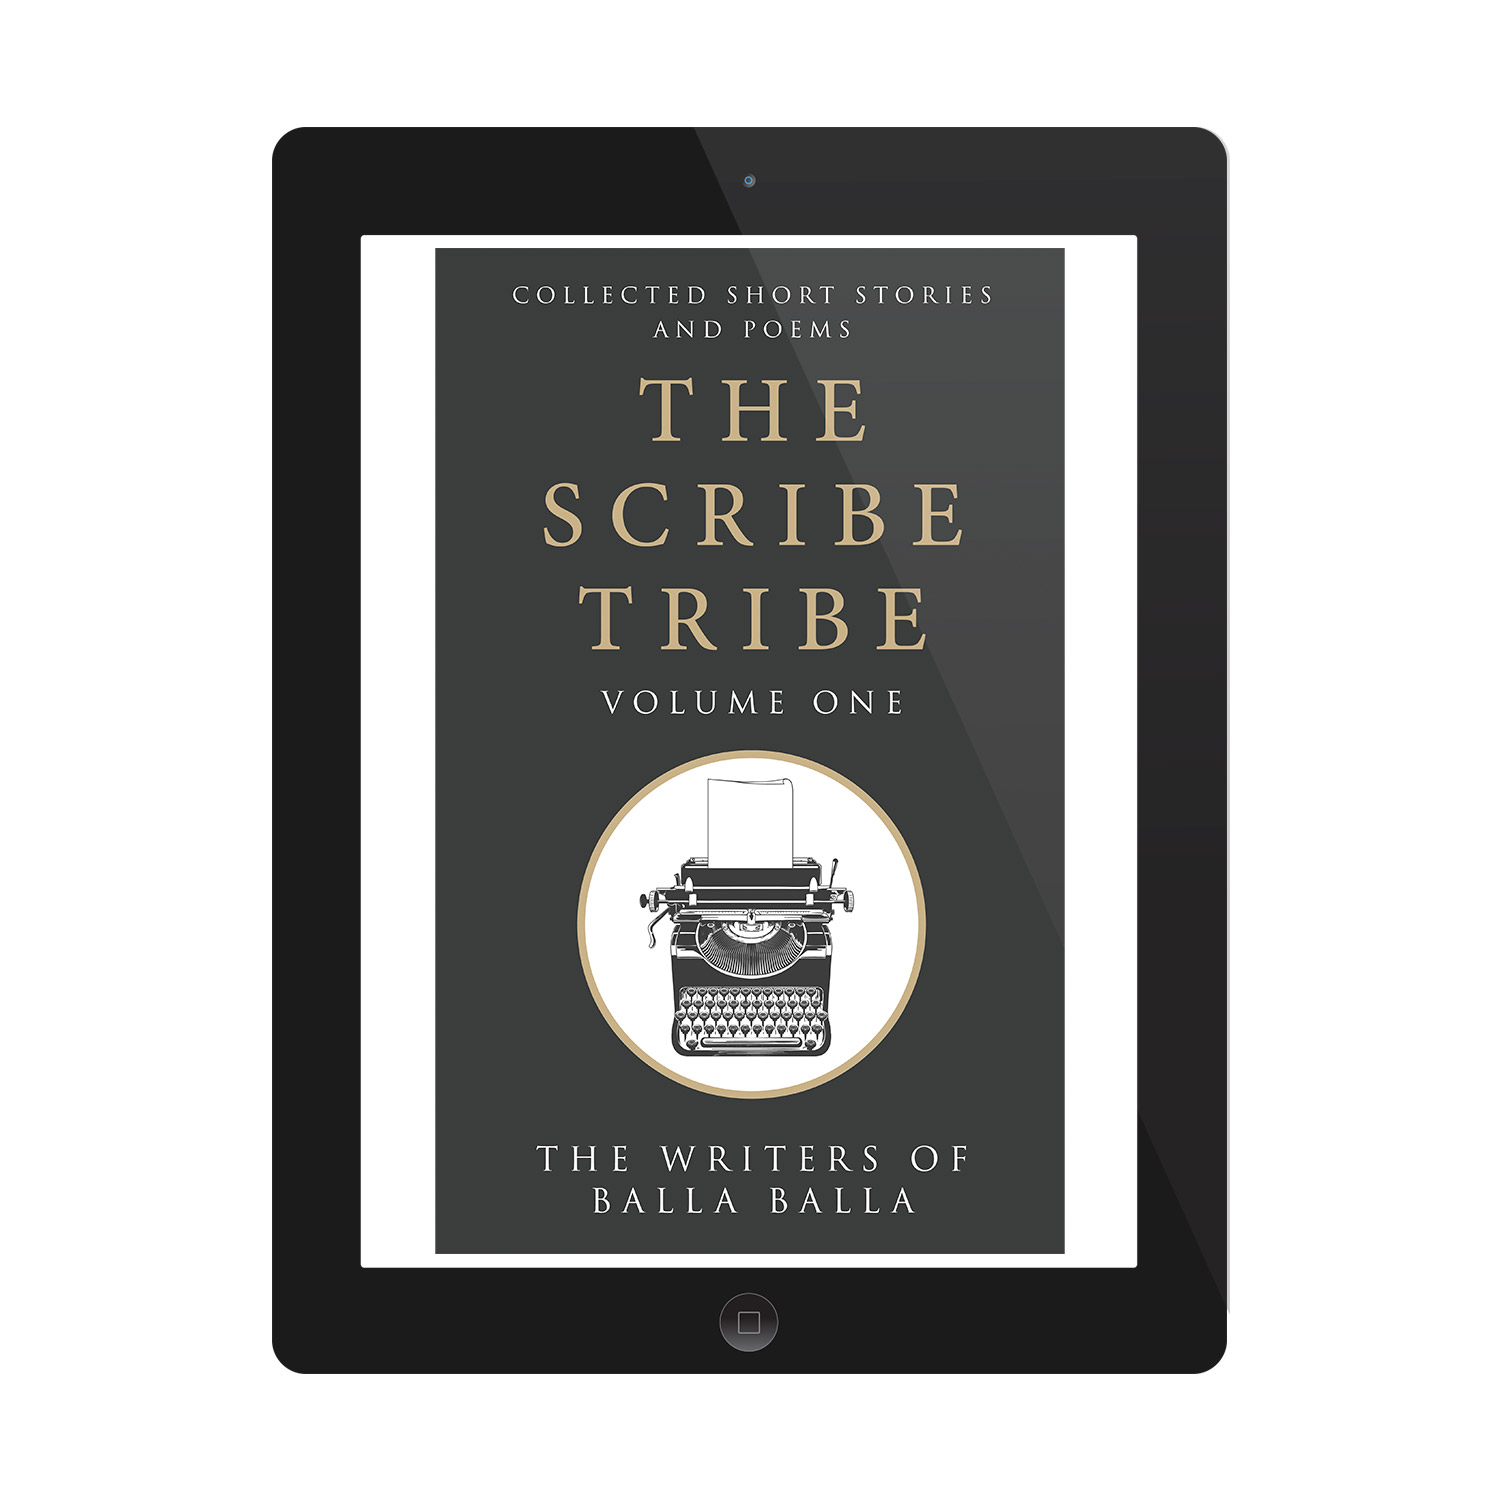 'The Scribe Tribe' is a compendium of short stories by an Australian Writing Group. The cover design and interior manuscript formatting are by Mark Thomas. Learn what Mark could do for your book by visiting coverness.com.